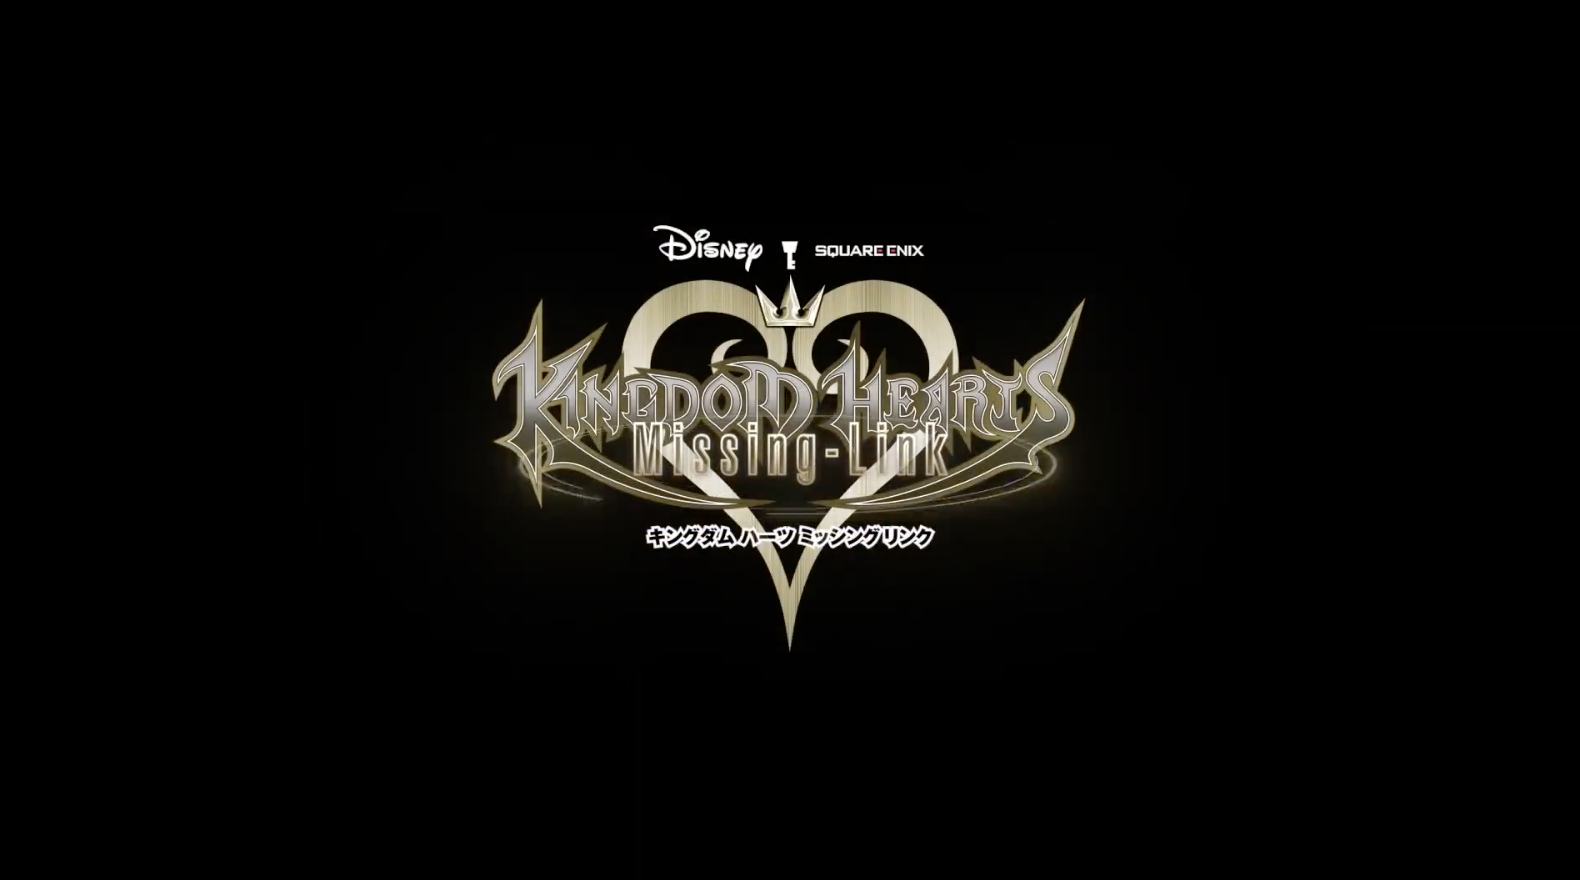 Kingdom Hearts: Missing Link closed beta registration is now open in the UK  and Australia